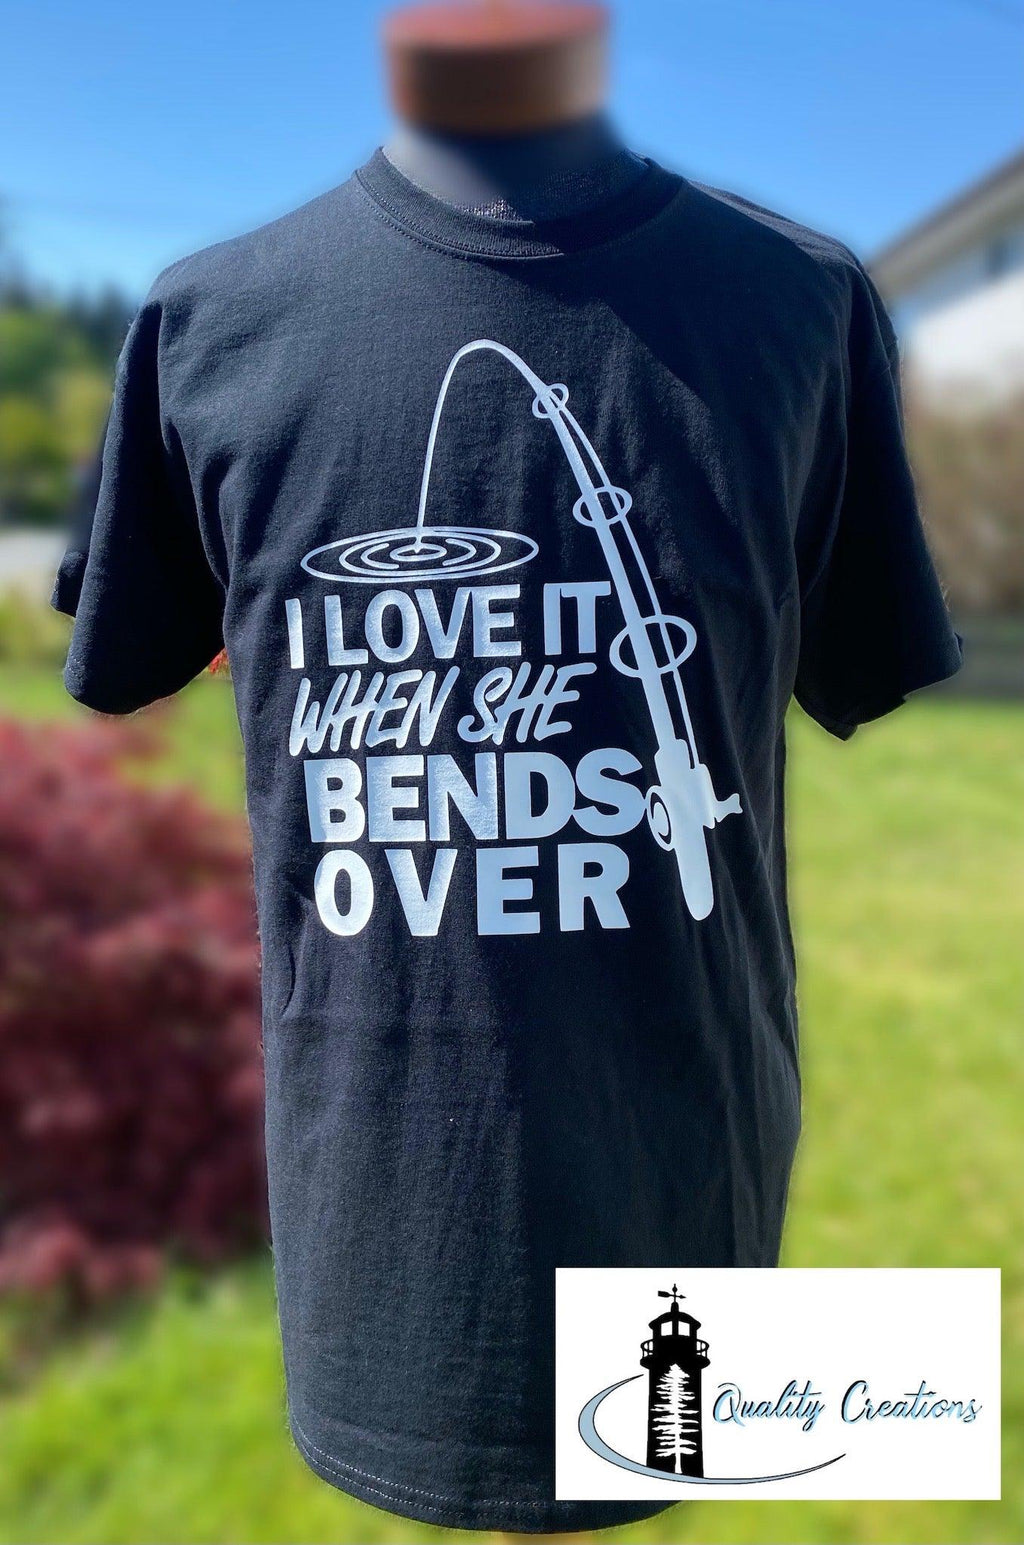 I love it when she bends over funny t-shirt quality creations canada